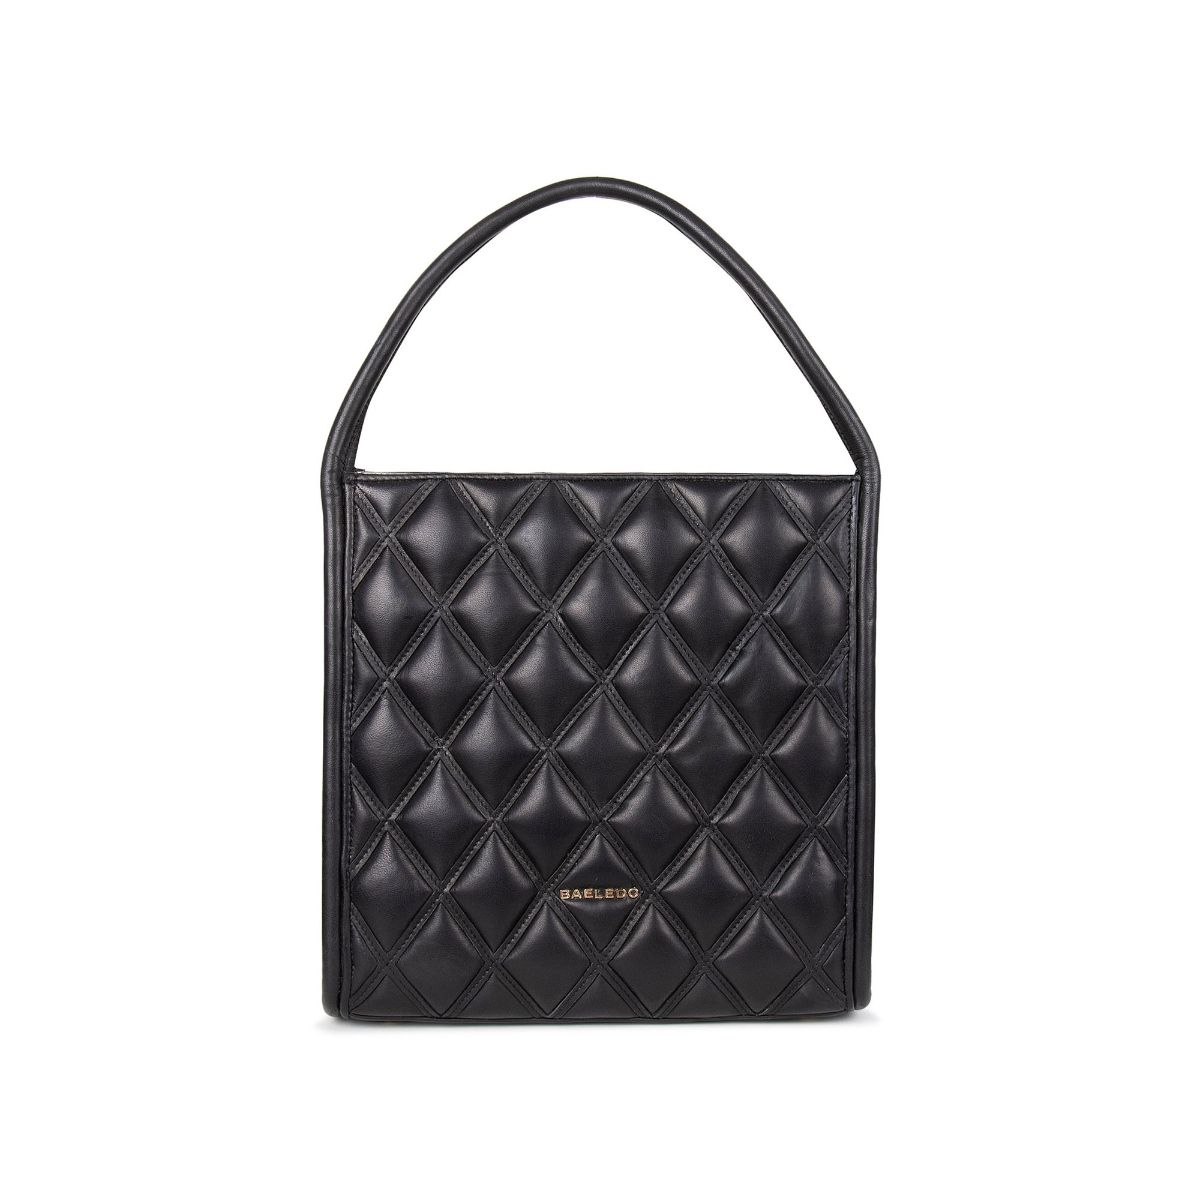 Baeledo Catania Quilted Leather Tote Bsg-Black: Buy Baeledo Catania Quilted  Leather Tote Bsg-Black Online at Best Price in India